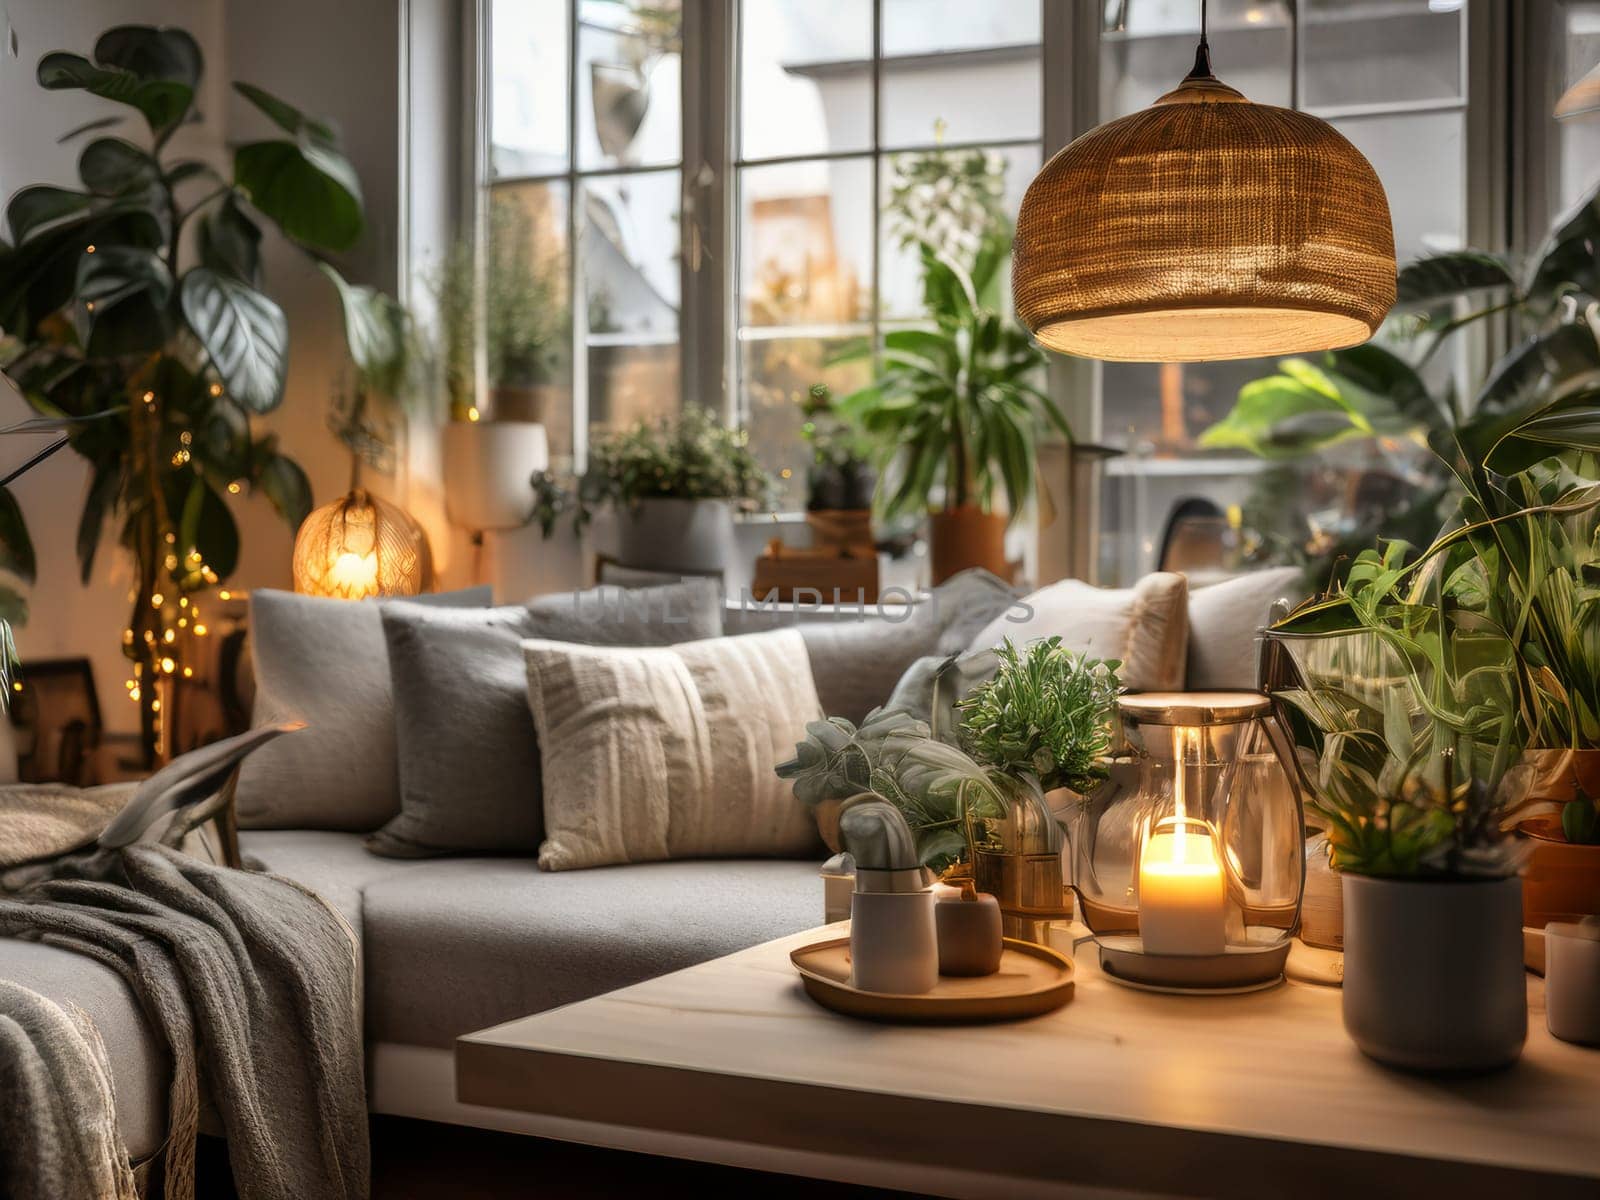 Urban jungle in living room interior with many plants by fascinadora